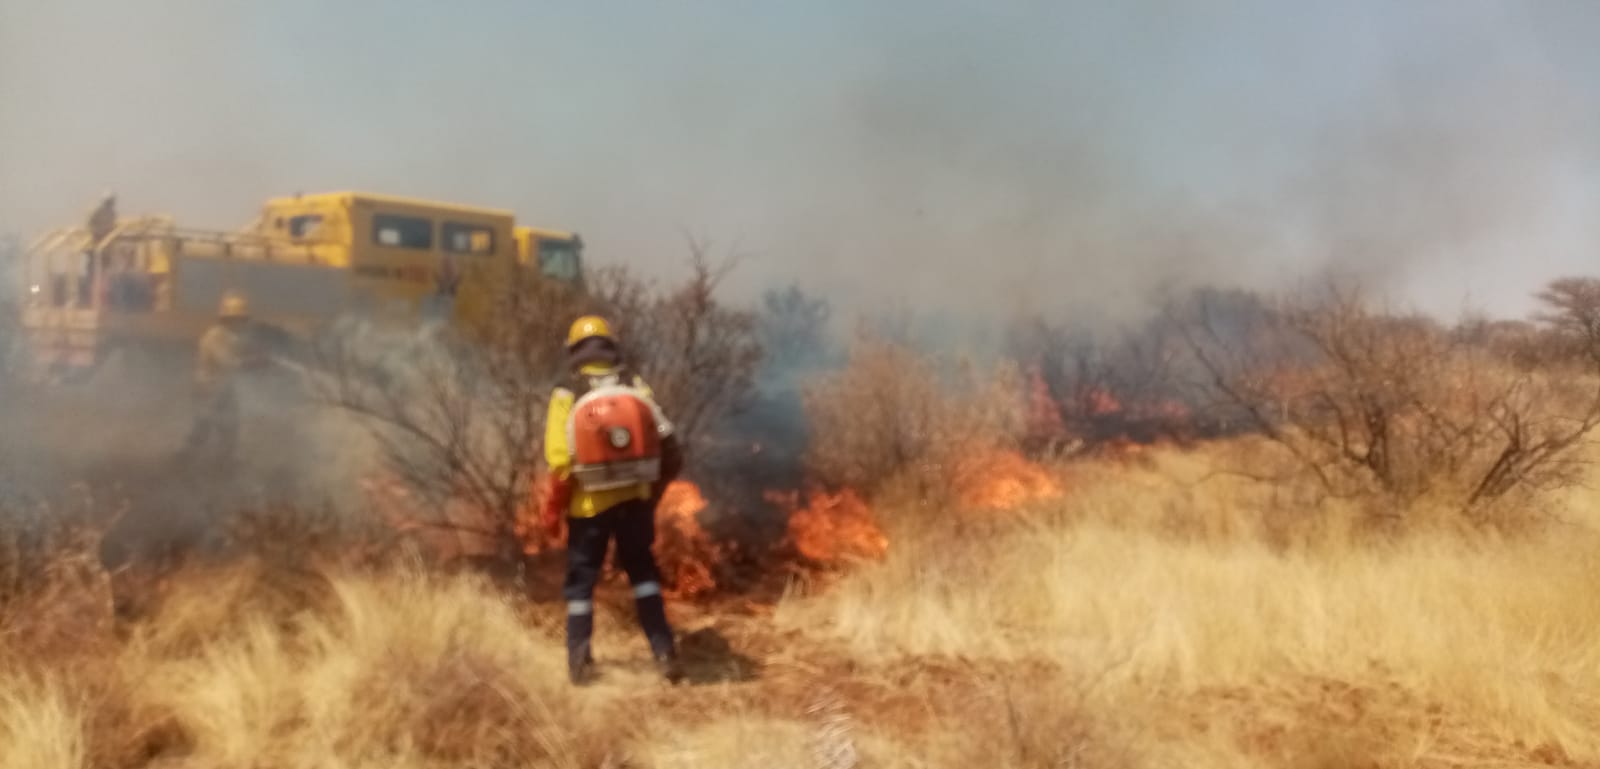 Working on Fire Free State combats fires as Winter Fire Season draws to a close